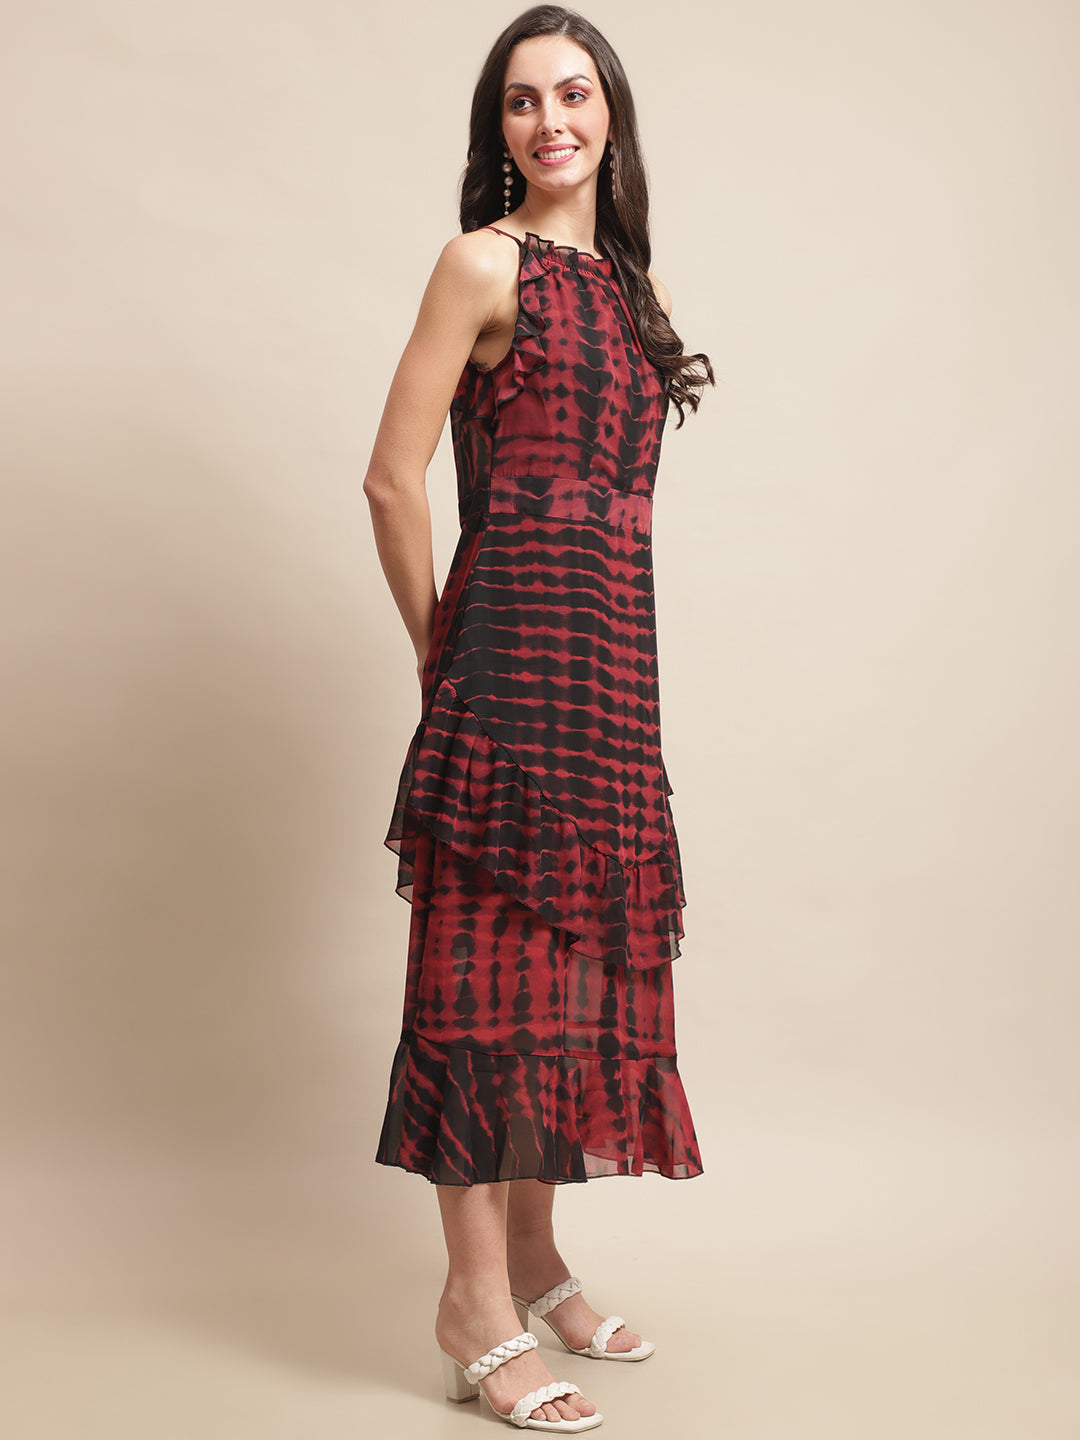 Maroon Color Abstract Printed Georgette Dress For Women Claura Designs Pvt. Ltd. Ethic dress Abstract, black, Dresses, Georgette, Maroon, Printed